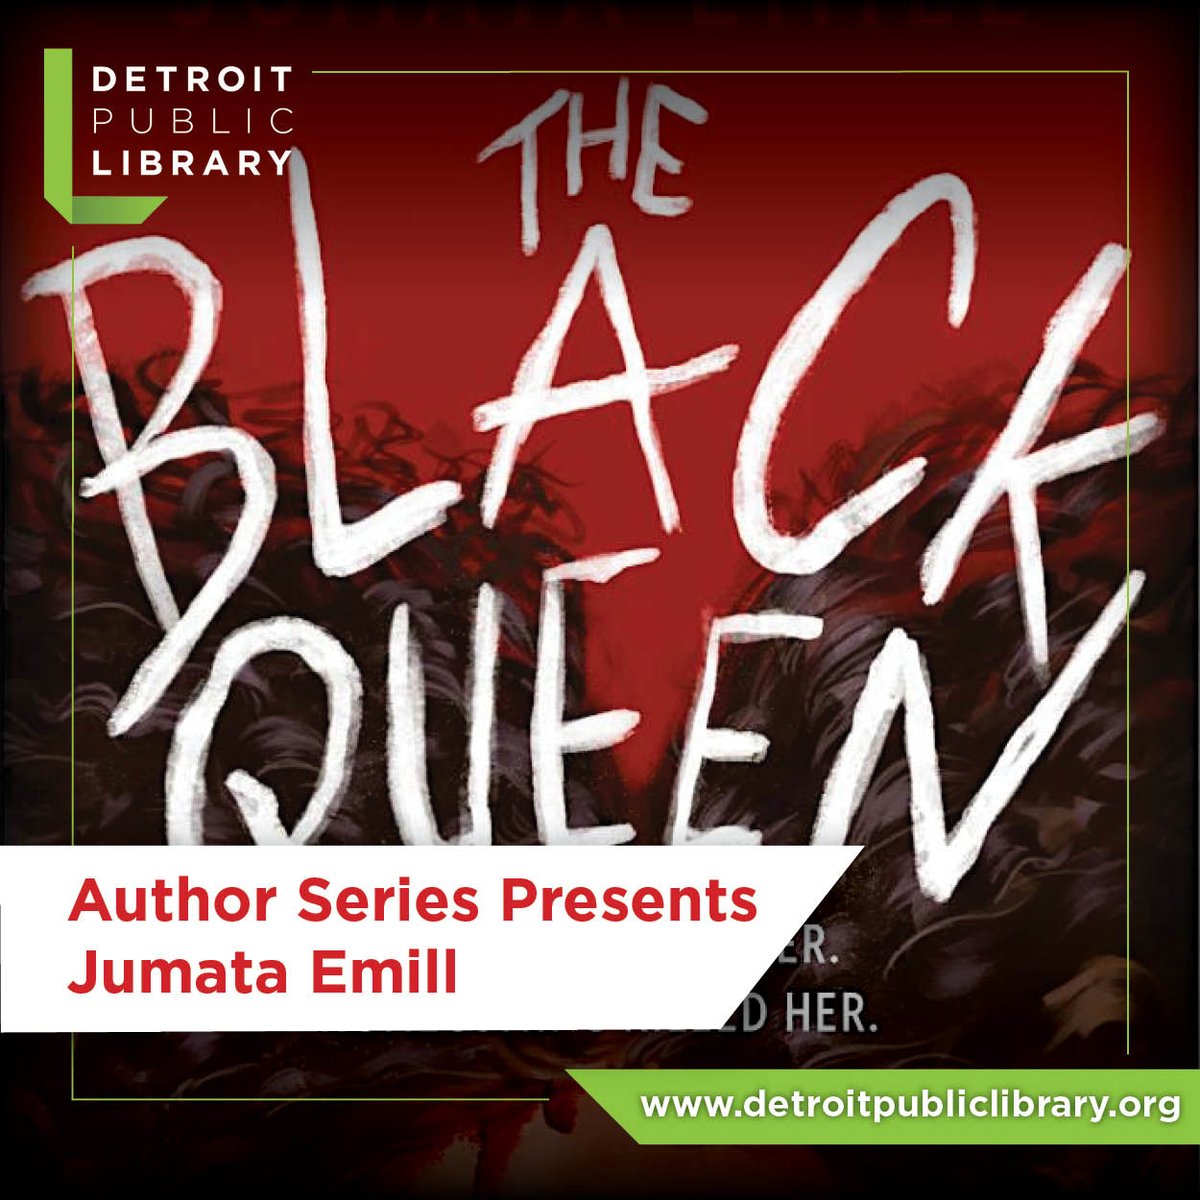 The #detroitpubliclibrary Author Series has two big events this weekend! On Saturday, June 3 at 1 pm we enjoy a discussion between friends and former colleagues @brownboywriting and @nancykaffer as they discuss Jumata's new book 'The Black Queen.' RSVP: eventbrite.com/e/dpl-author-s…